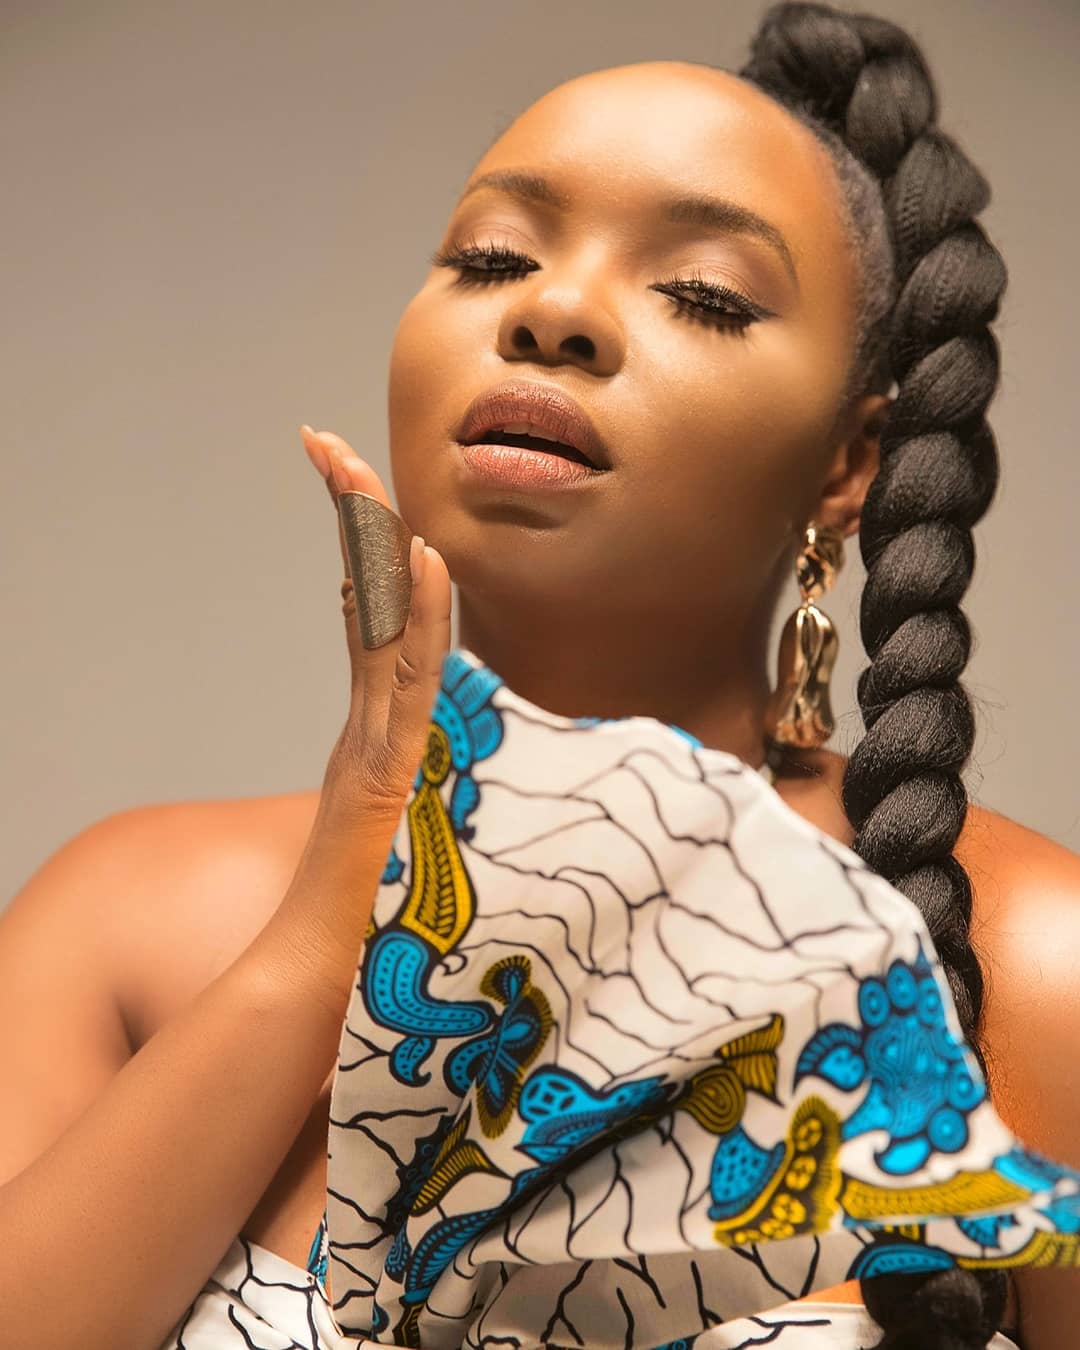 United Nations appoints Yemi Alade